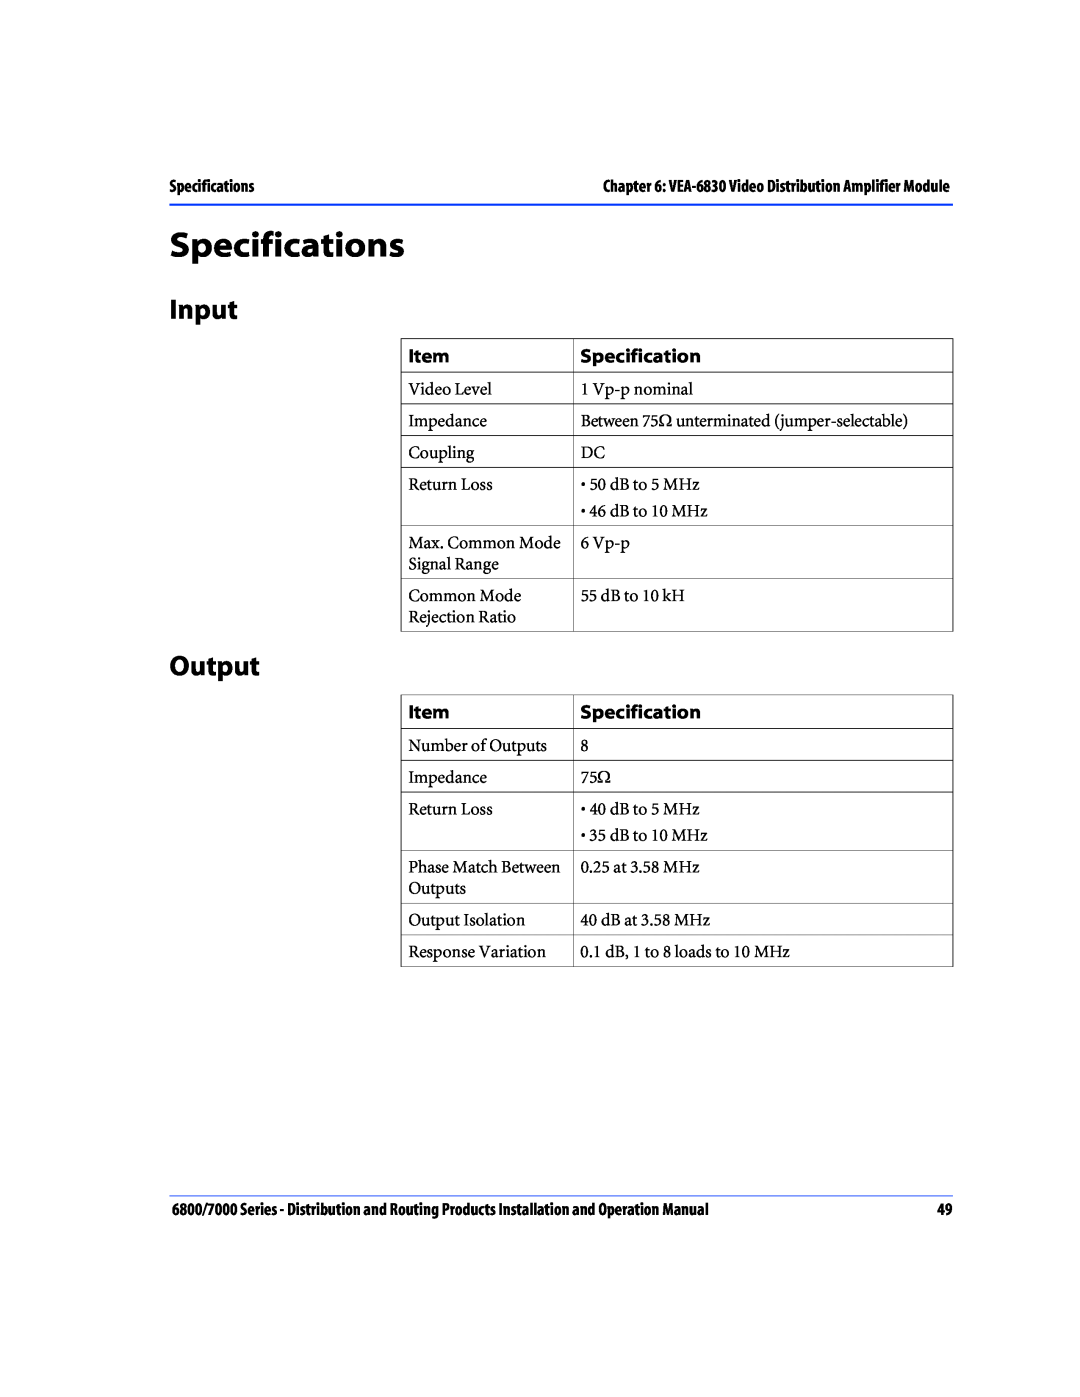 Nokia 6800 Series, 7000 Series operation manual Specifications, Input, Output 